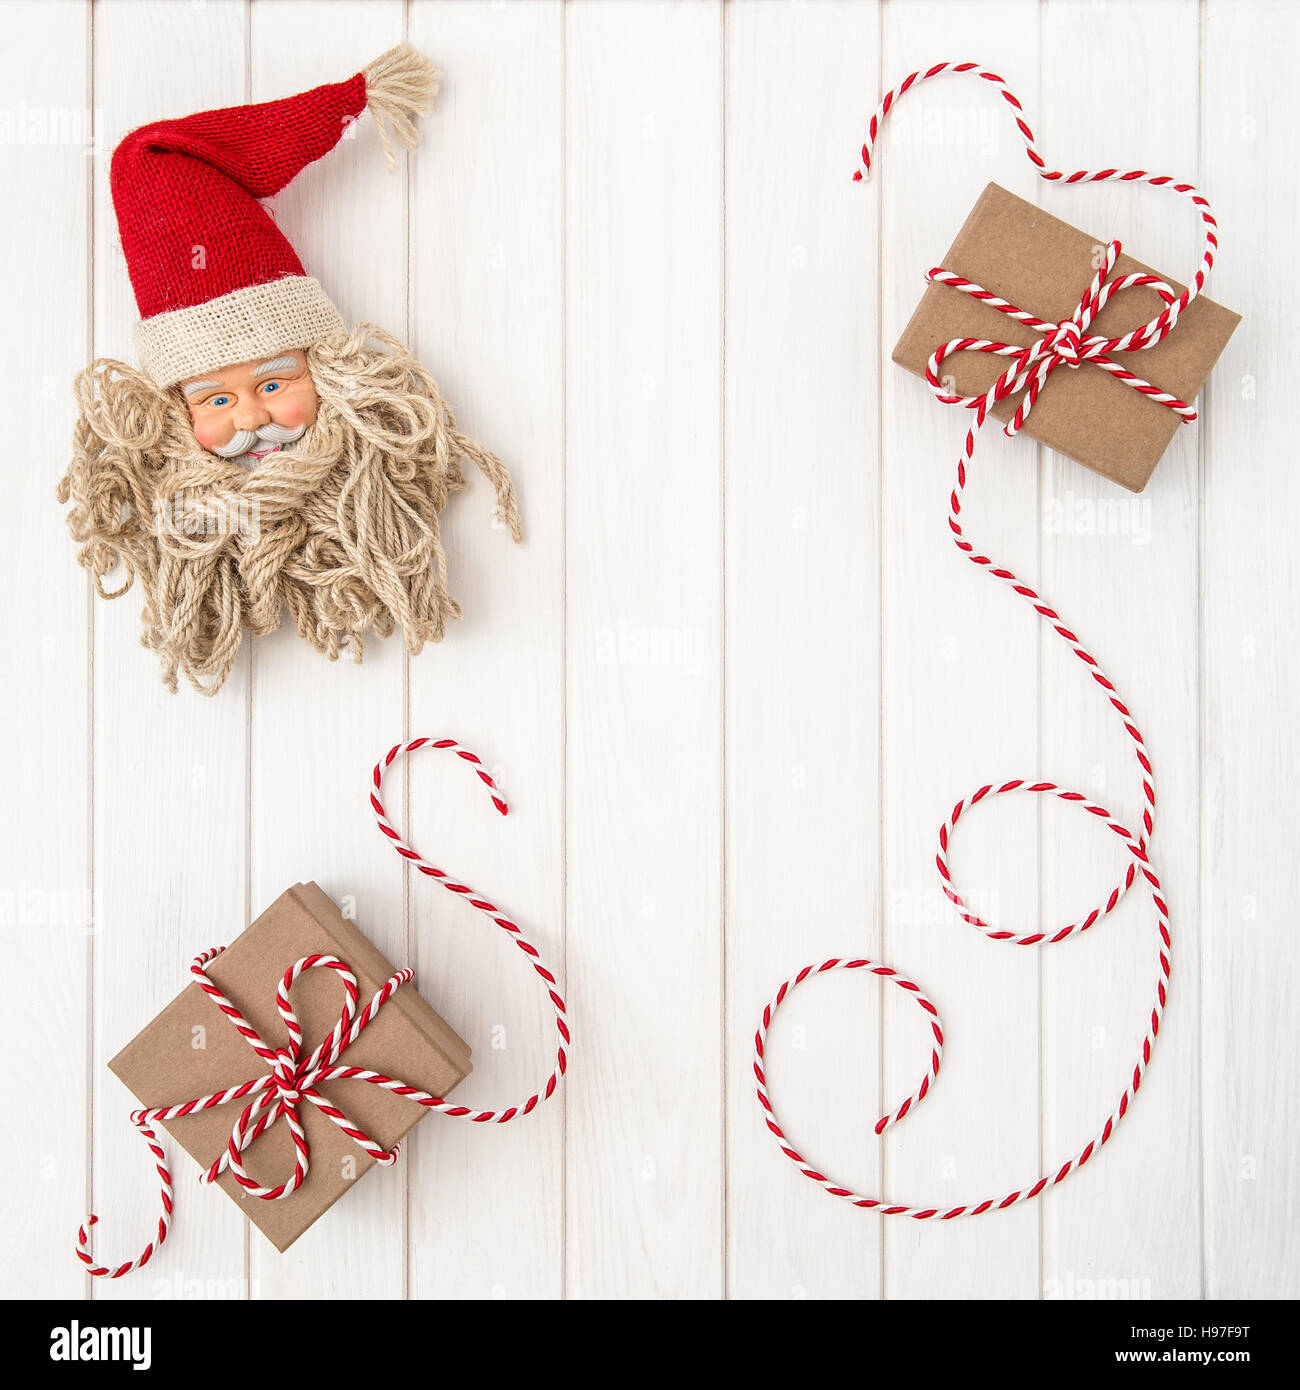 Christmas decoration with gift box and Santa Claus over bright wooden background Stock Photo